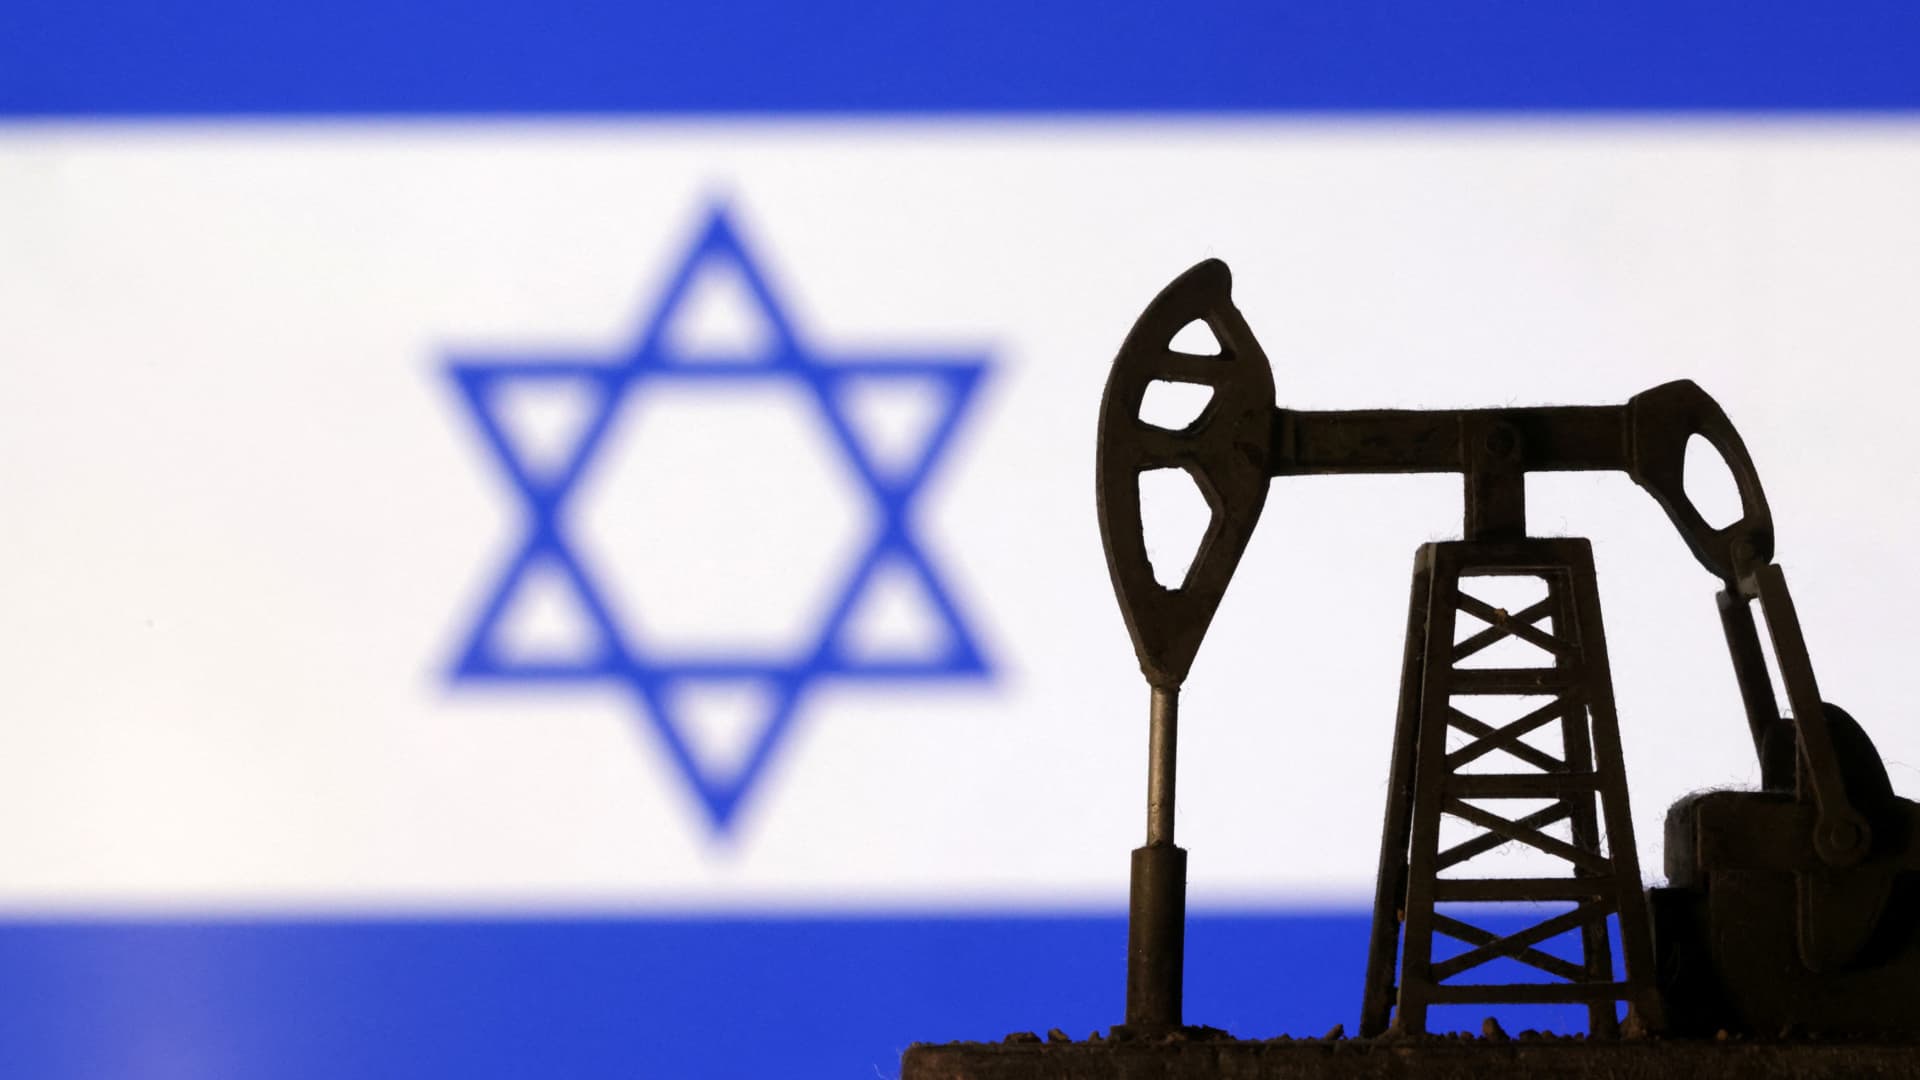 How oil could spike to $150, even $250 if Israel-Gaza war escalates, according to Bank of America